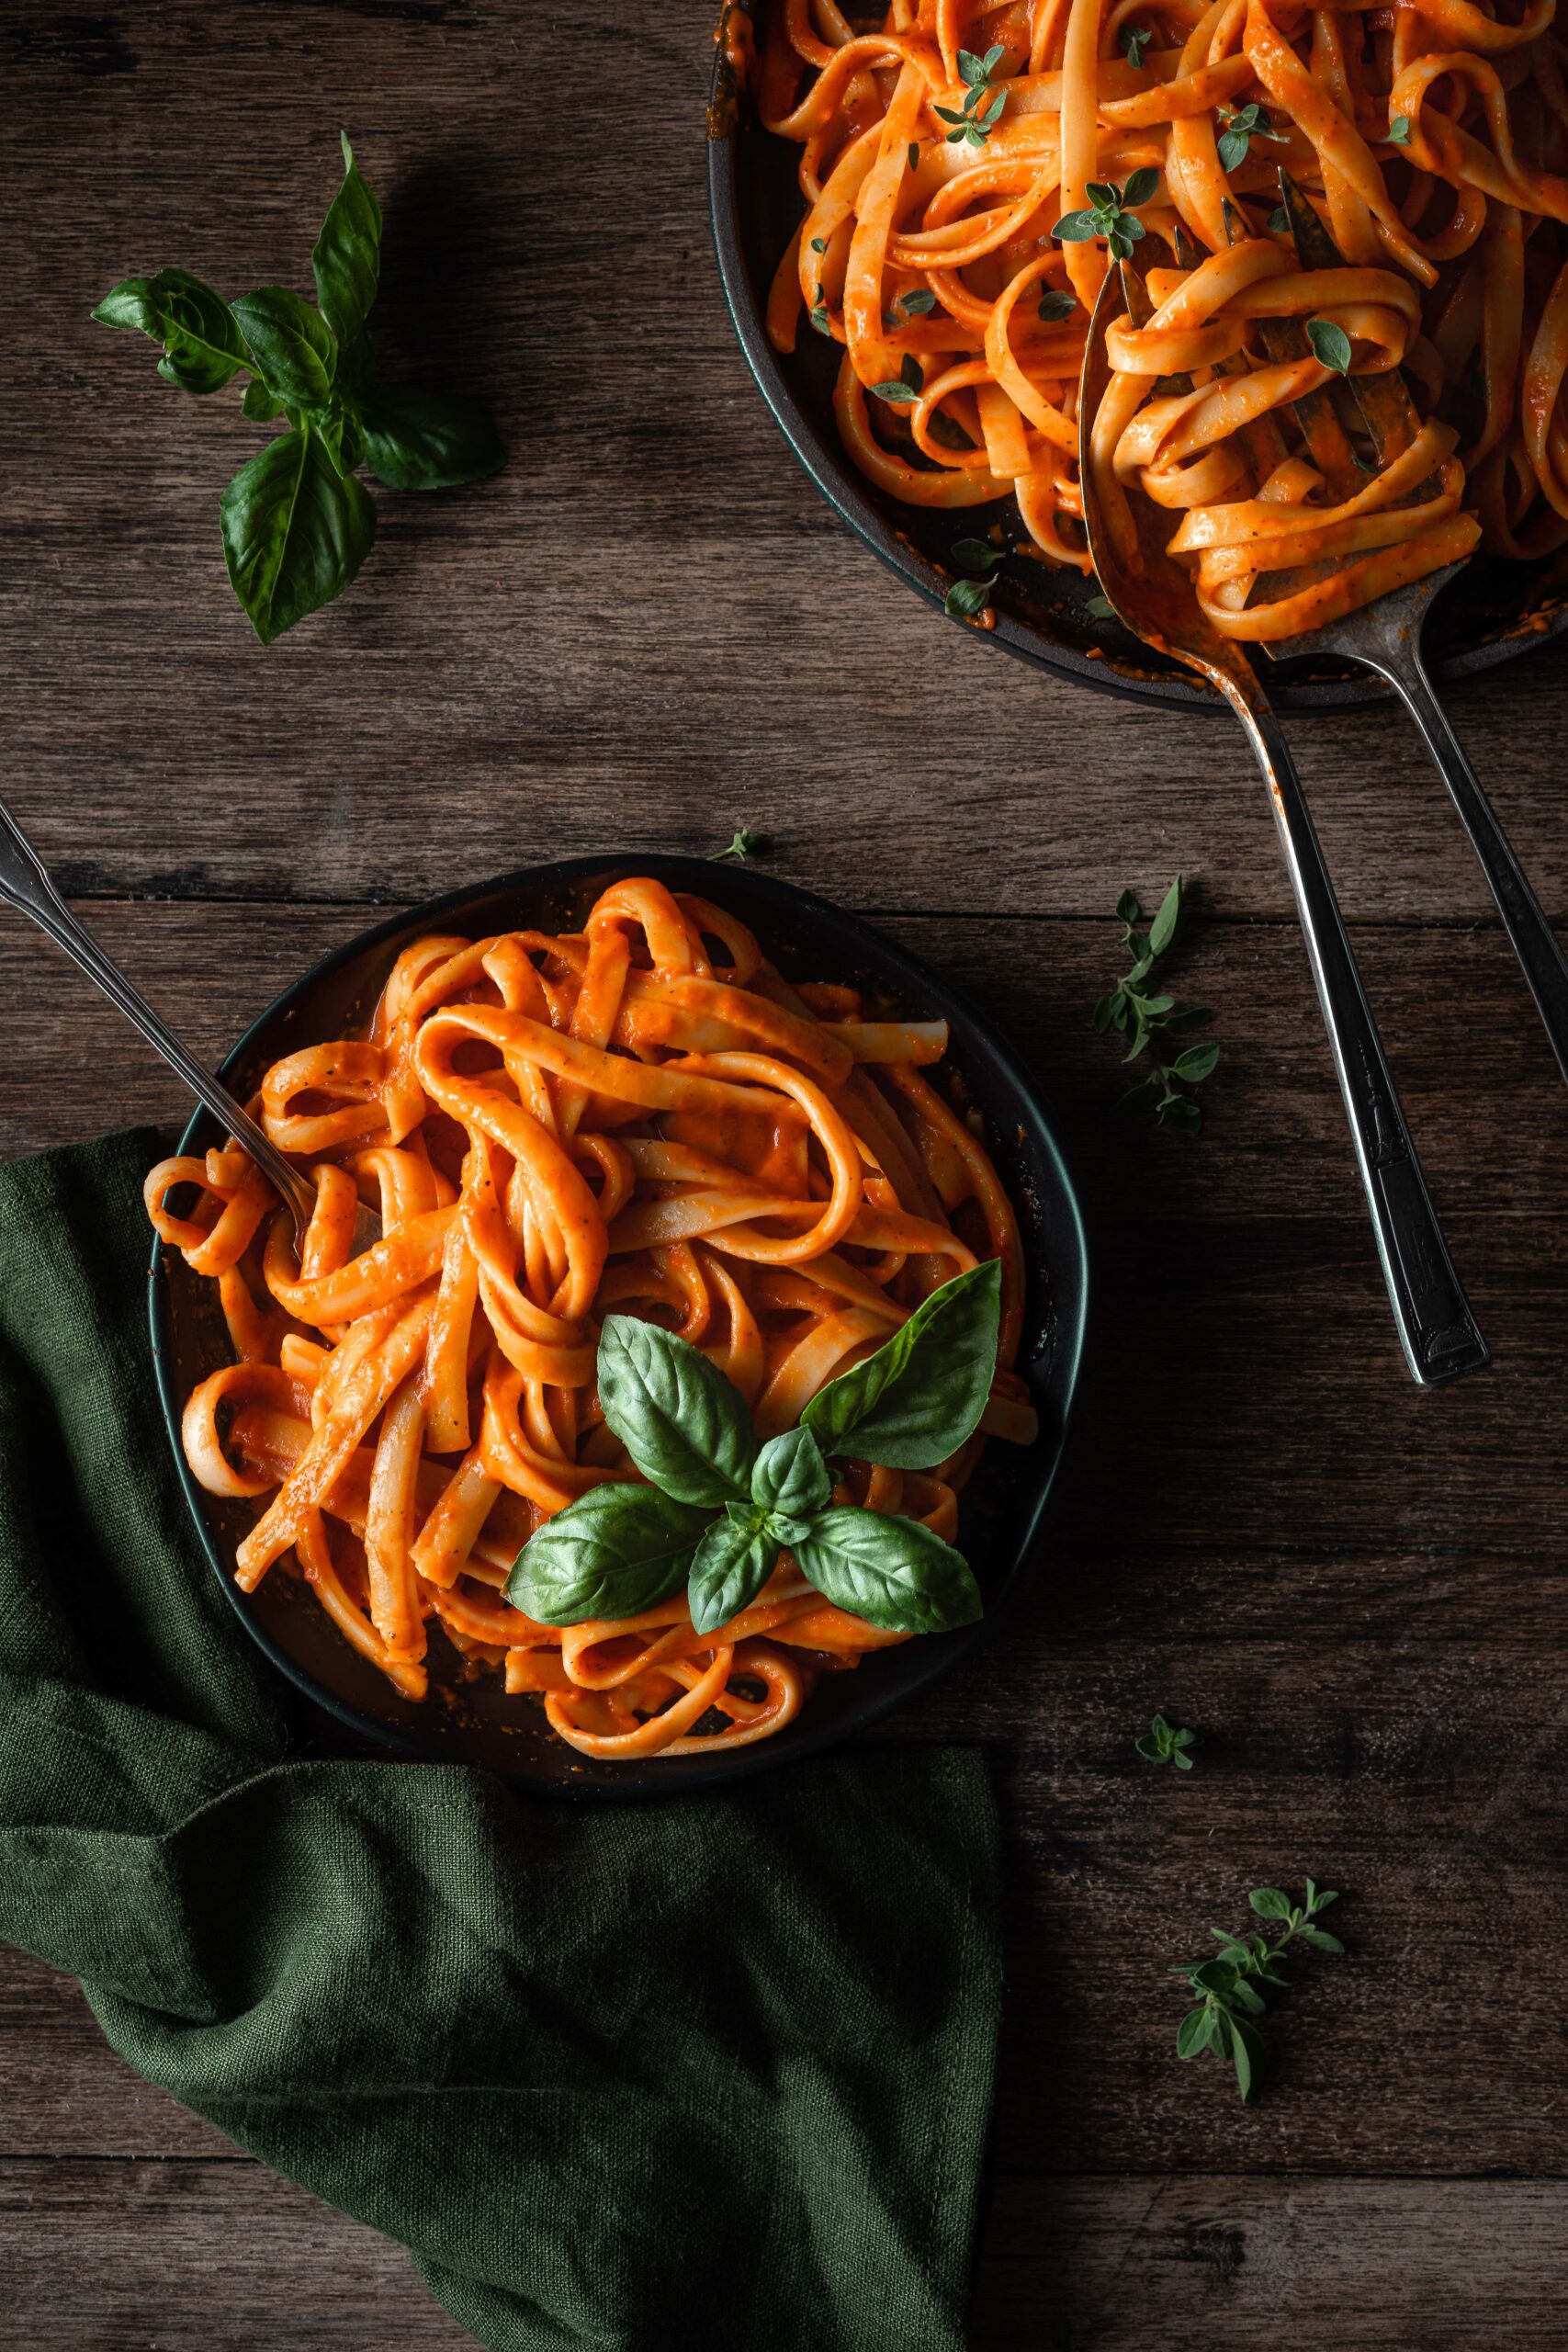 red pepper pasta garnished with basil.